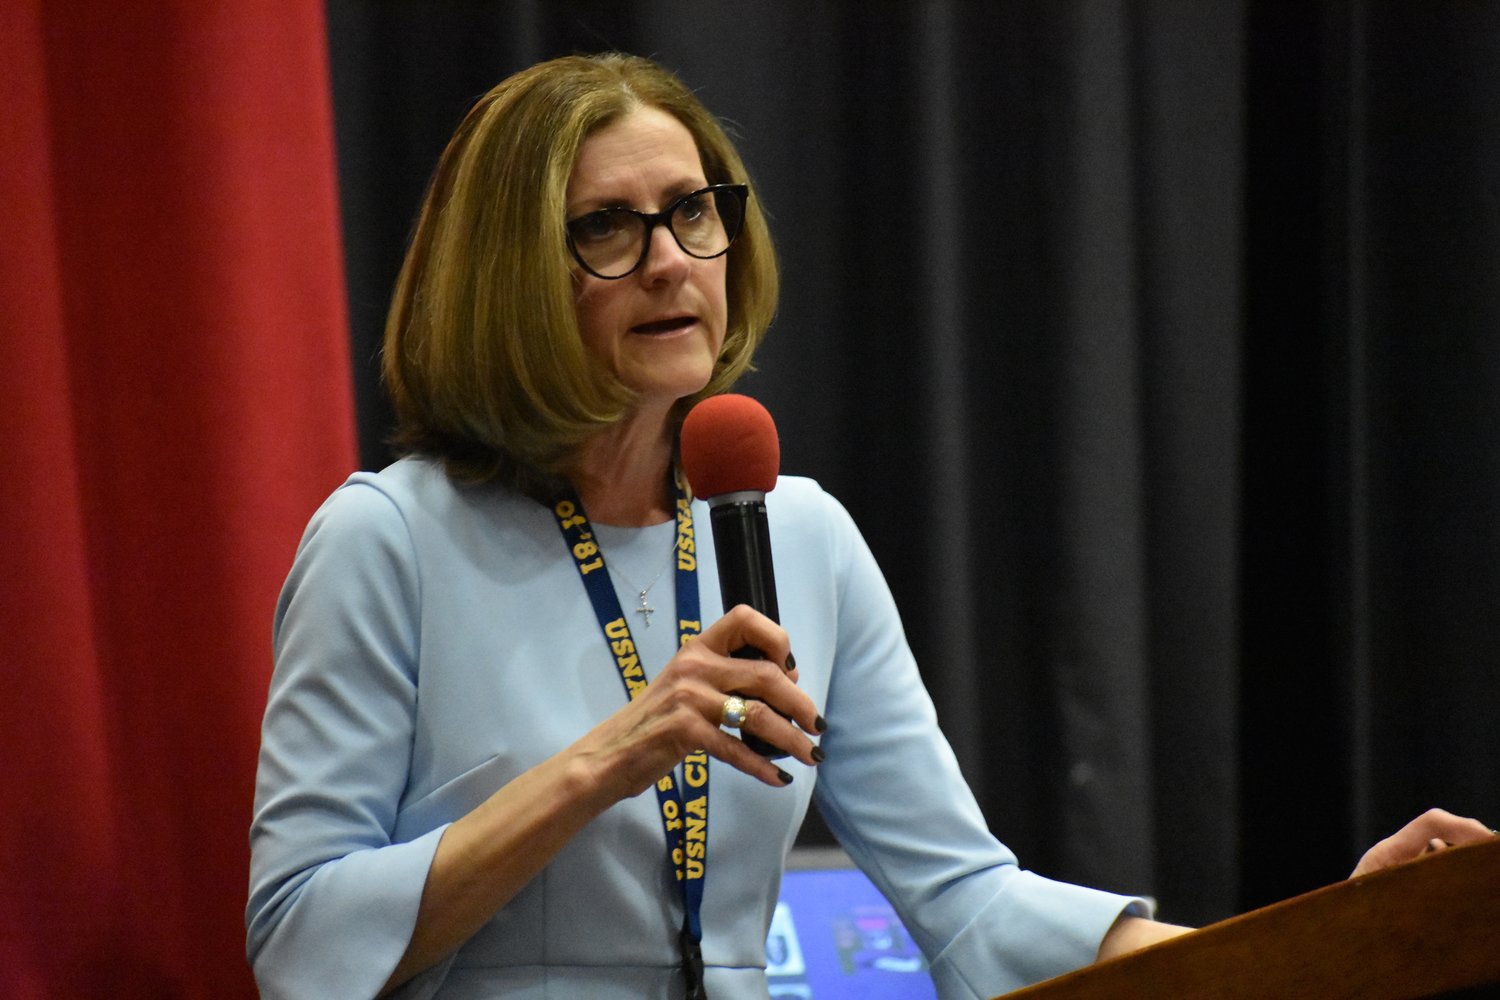 Dr. Noreen Leahy, the Rockville Centre School District’s assistant superintendent for pupil personnel services and special education, talked about the consequences of drug abuse.